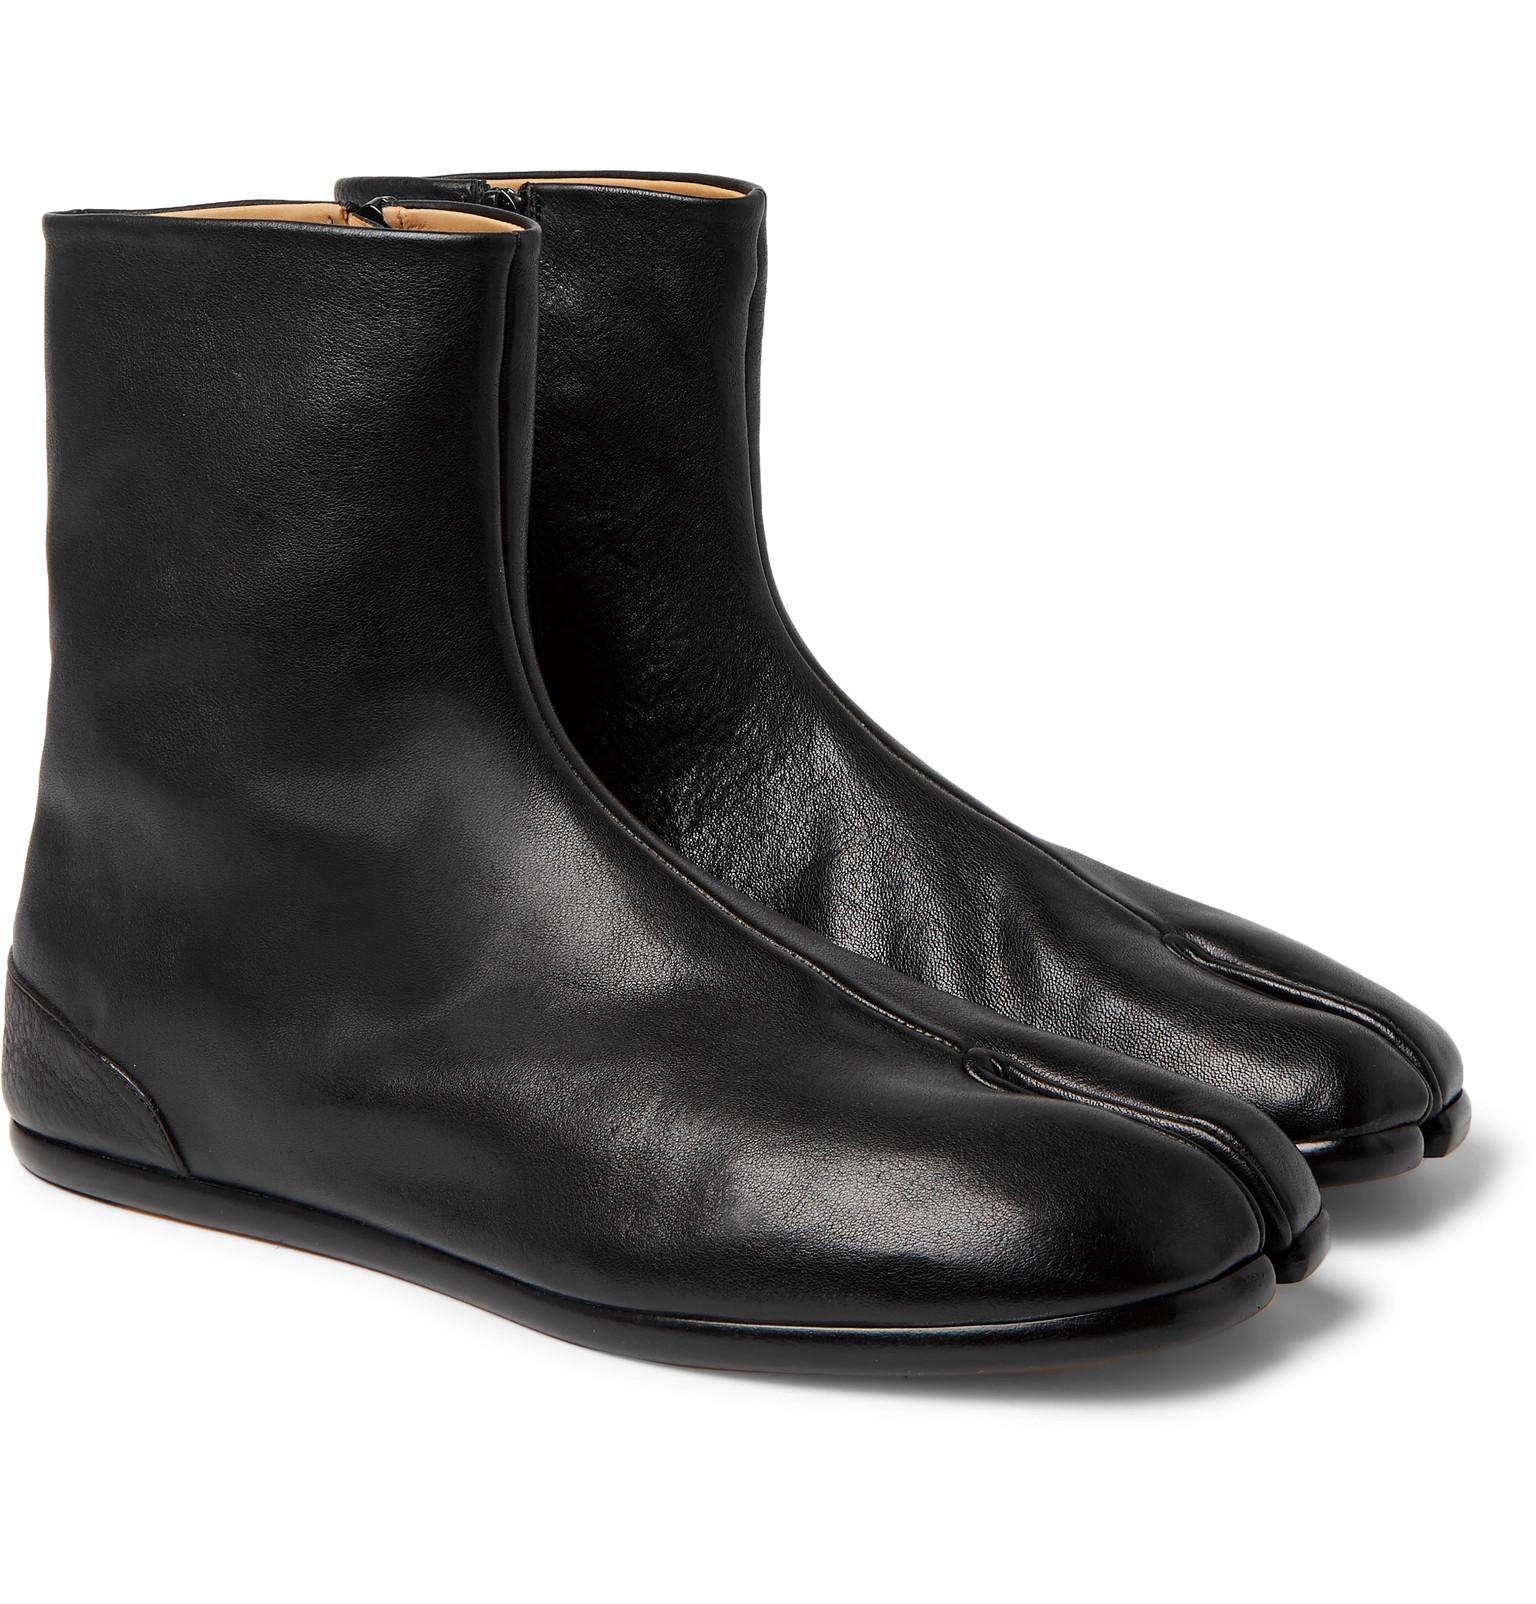 Maison Margiela Leather Tabi Boots in Black for Men - Save 46% - Lyst